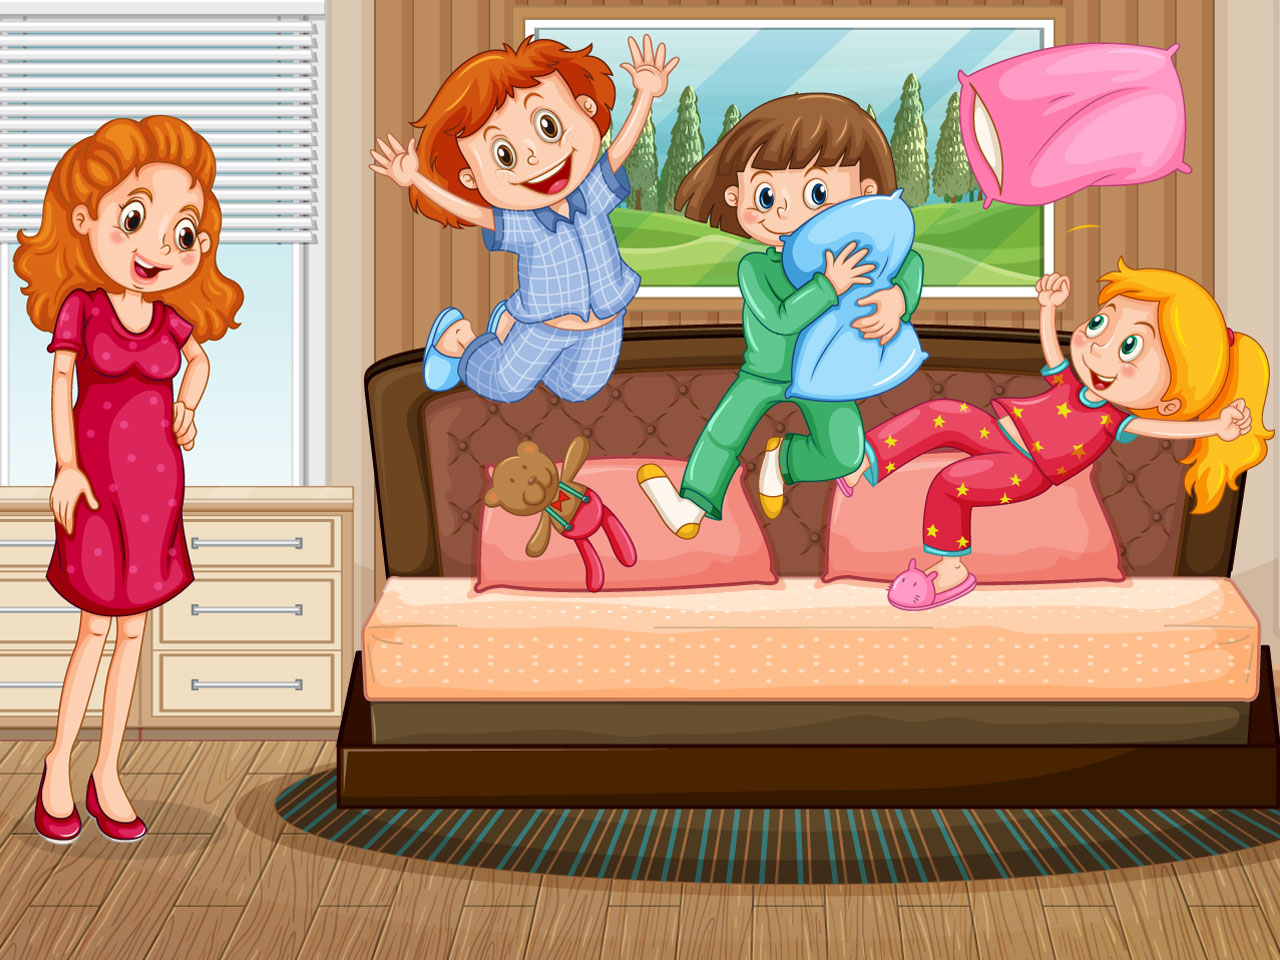 Bedroom scene with mother looking her children jumping bed clipart